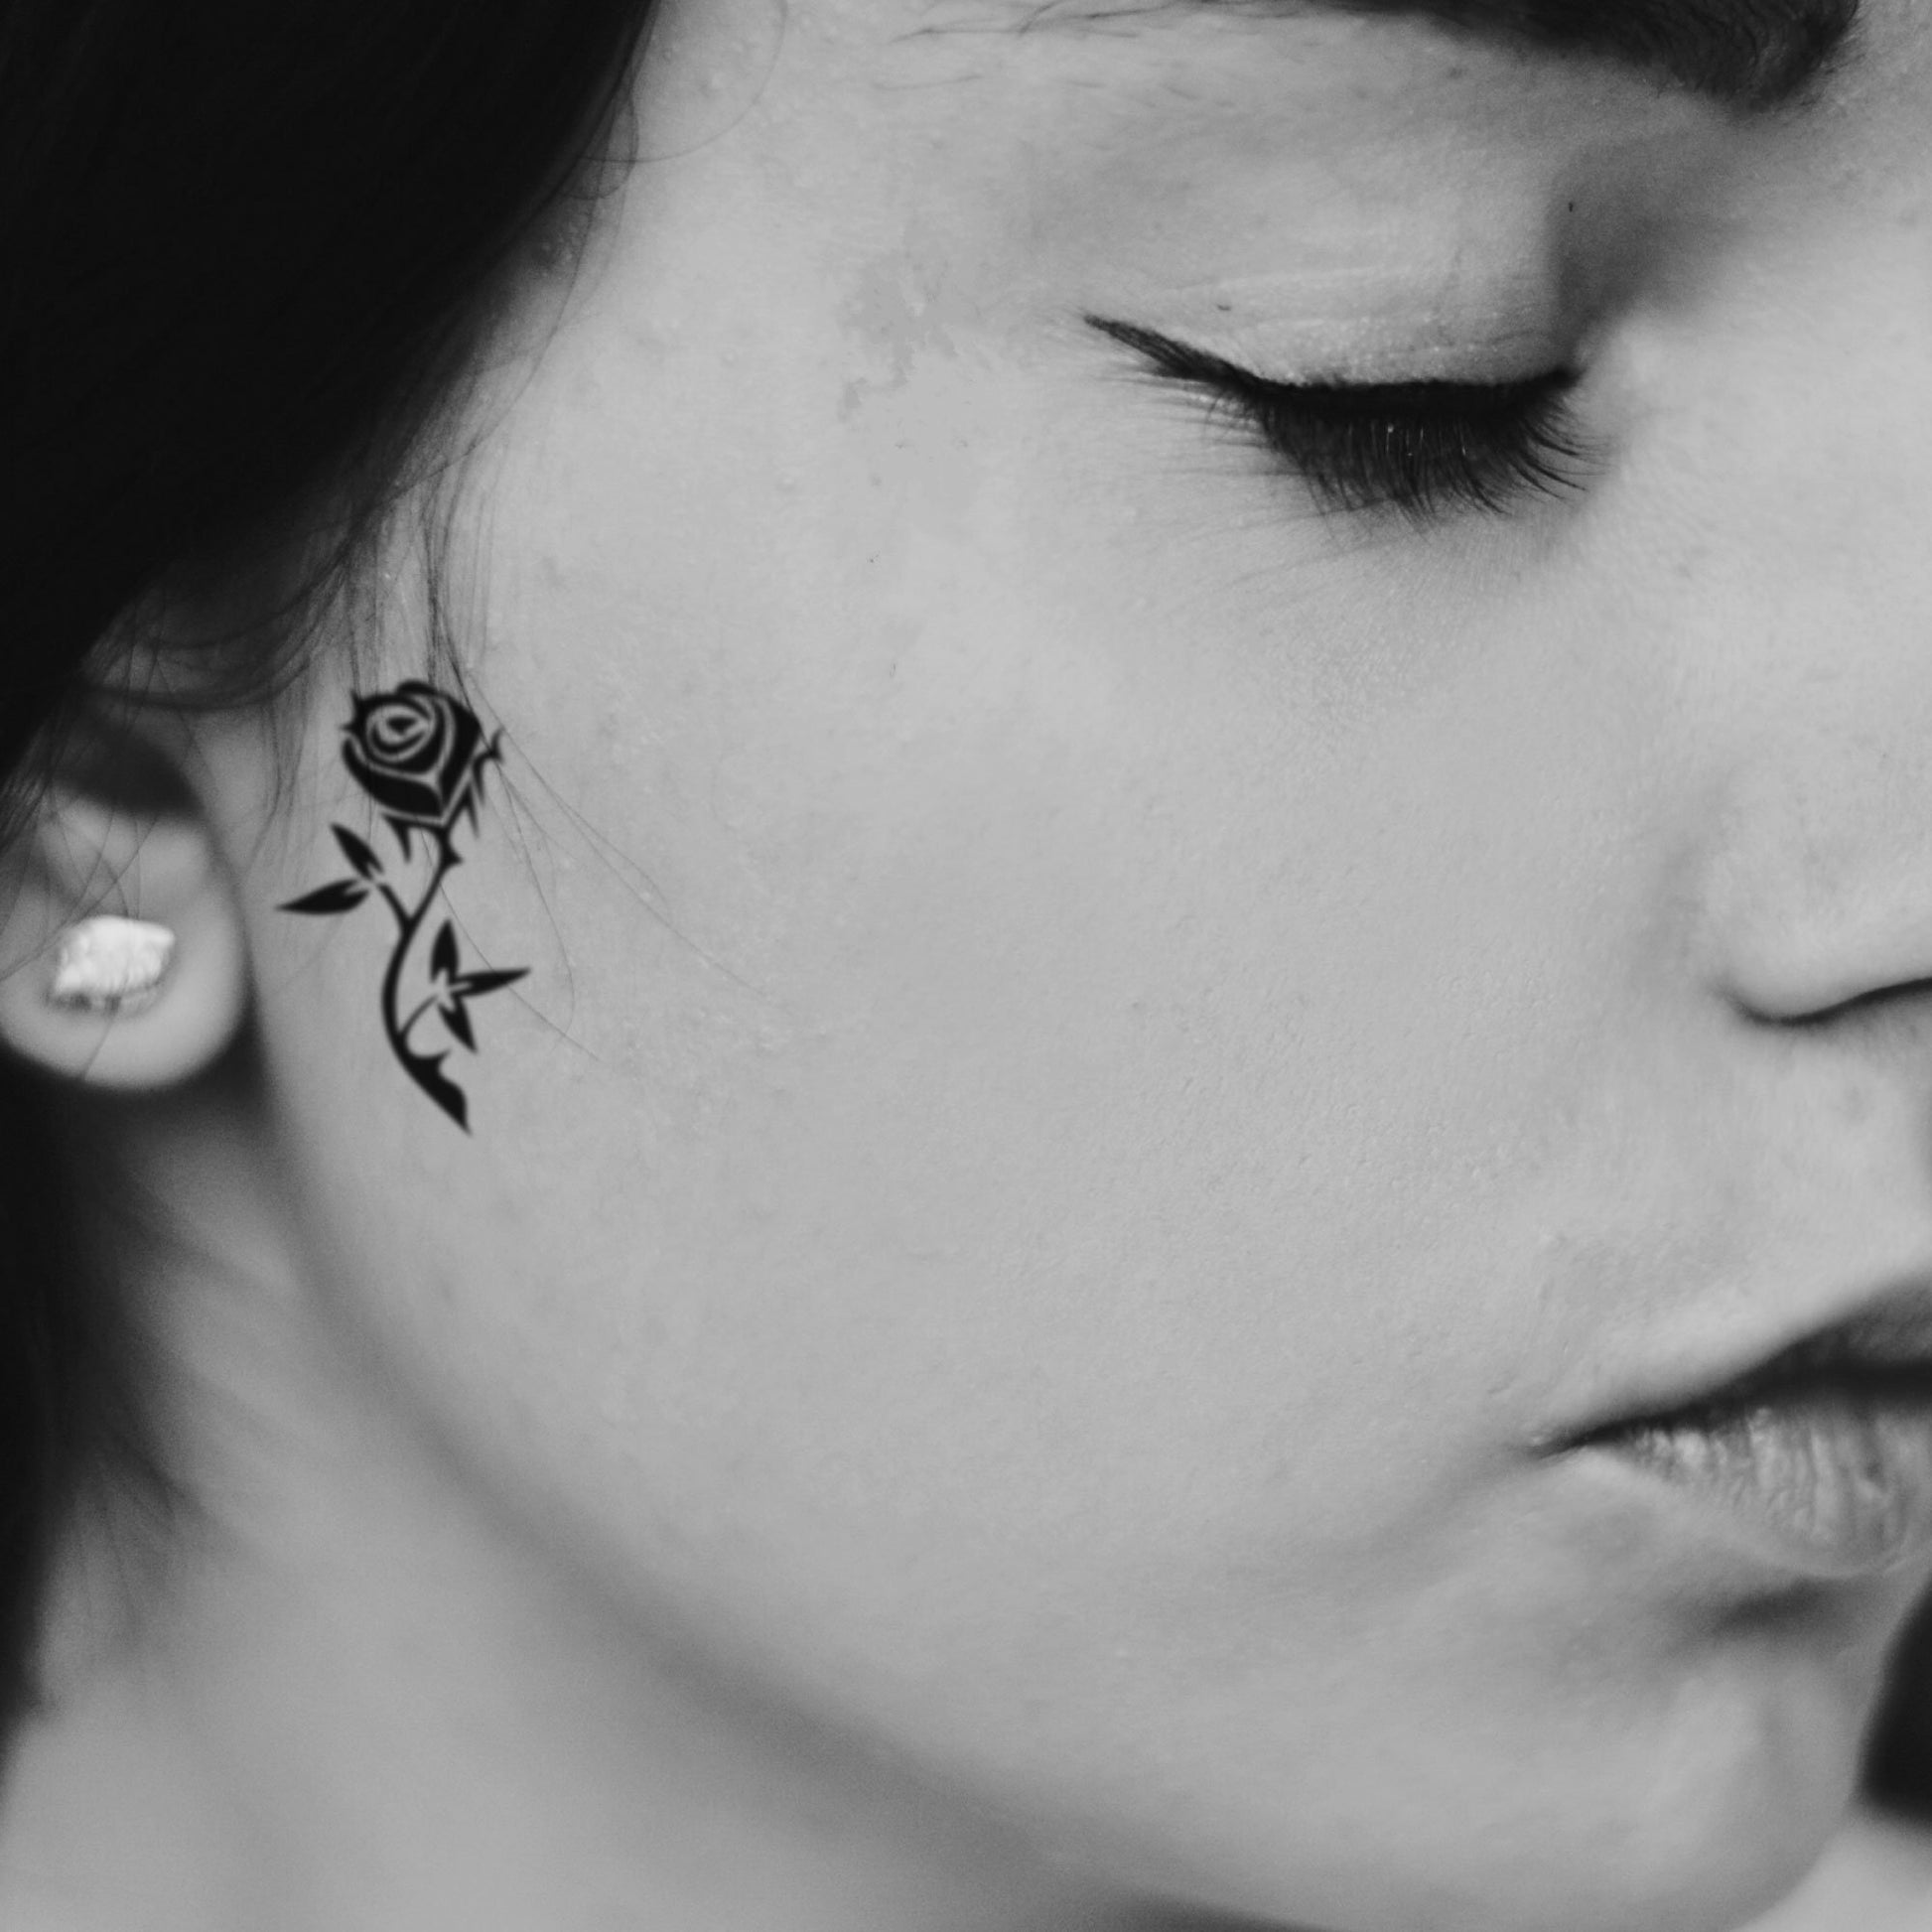 fake small tragus sideburn rose ear from concrete flower temporary tattoo sticker design idea on face head